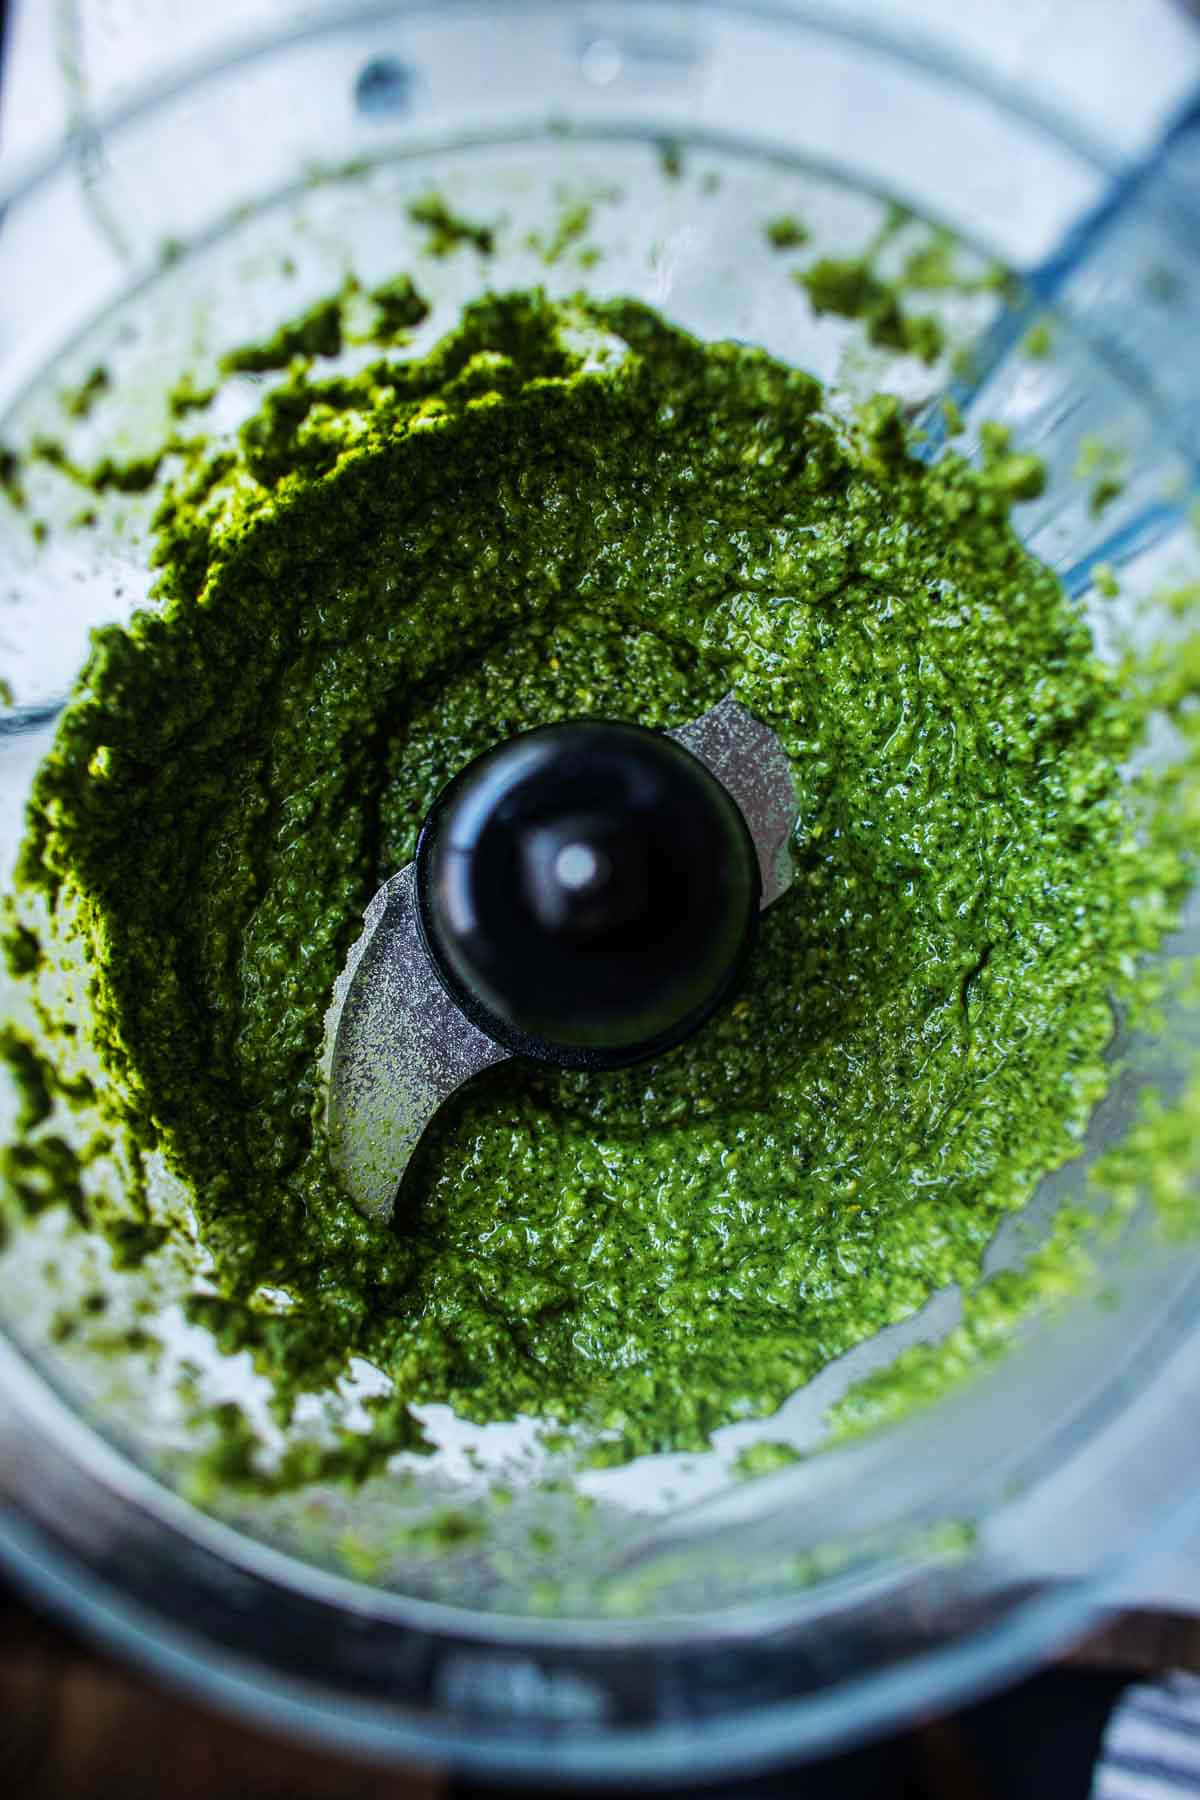 homemade thai basil pesto
blended in a food processor